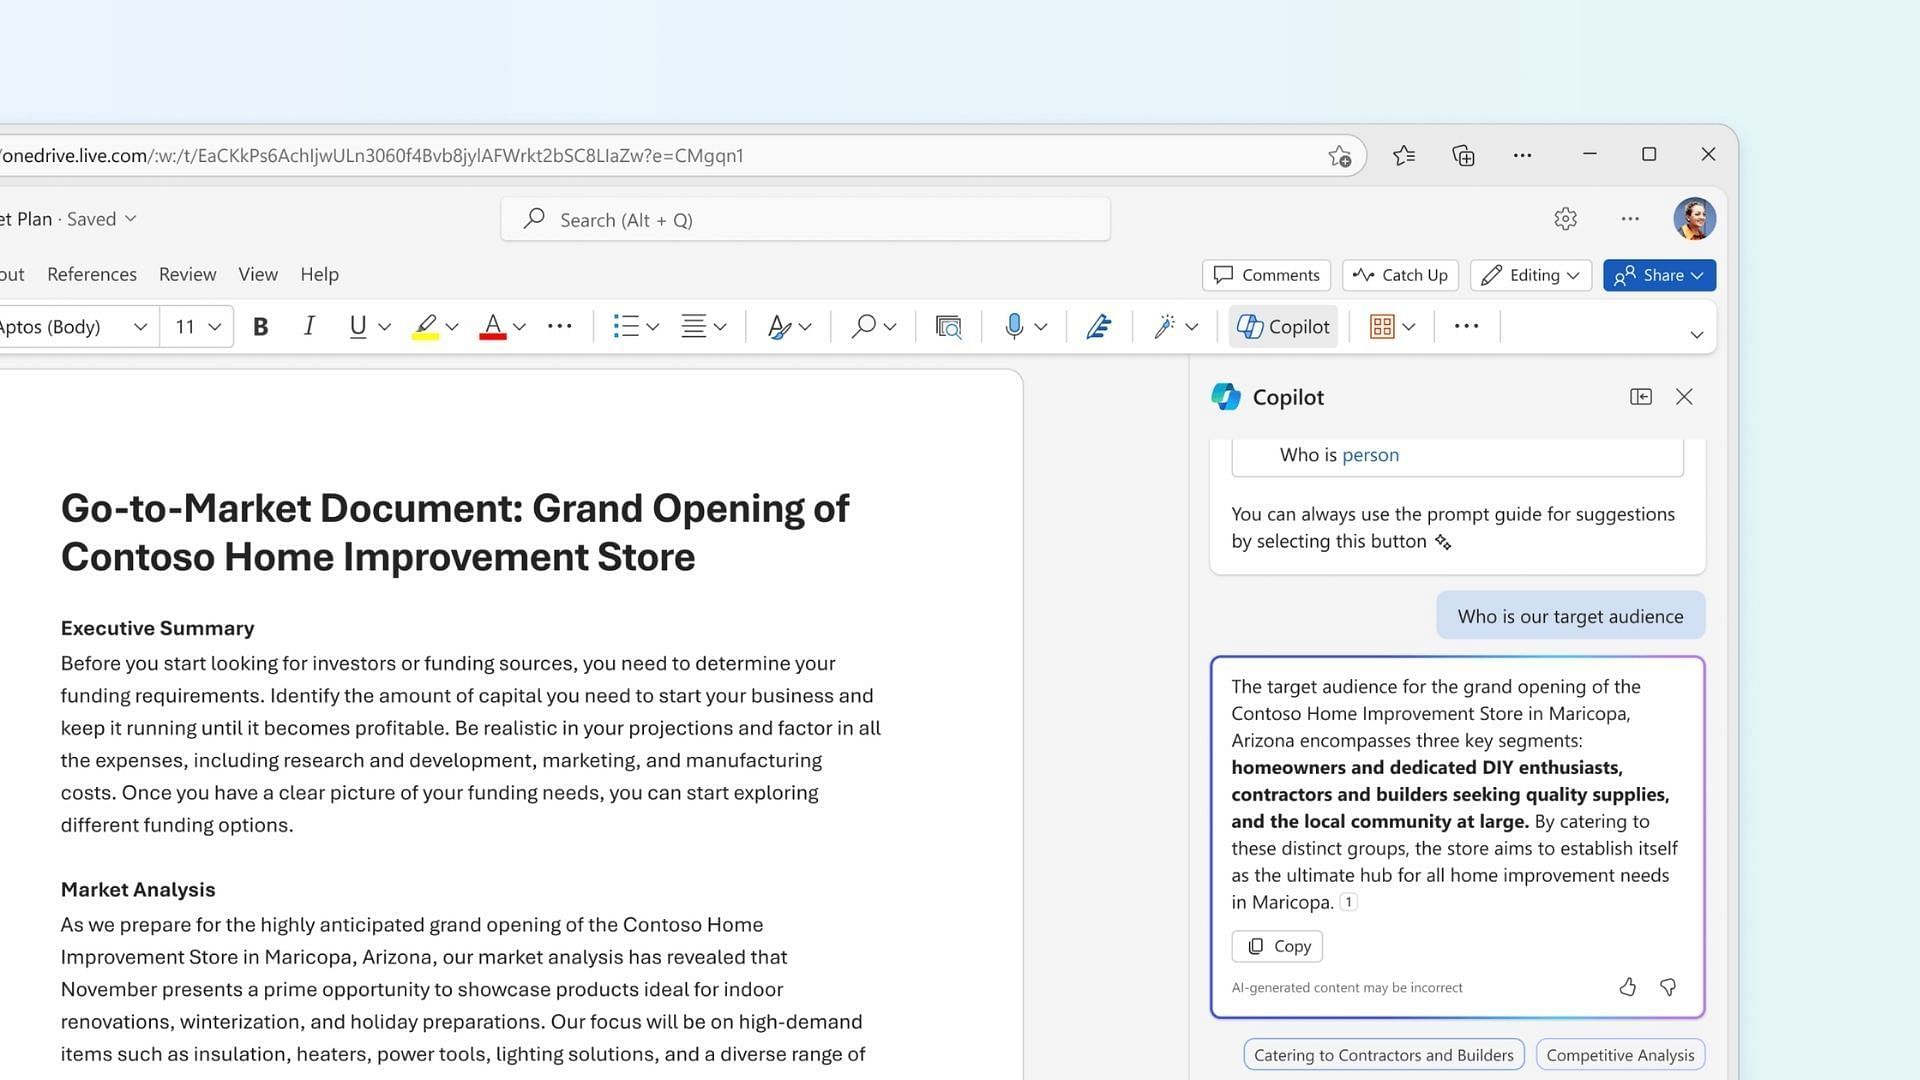 Copilot is a handy assistant that can summarize long paragraphs and documents for you with ease (Image via Microsoft)